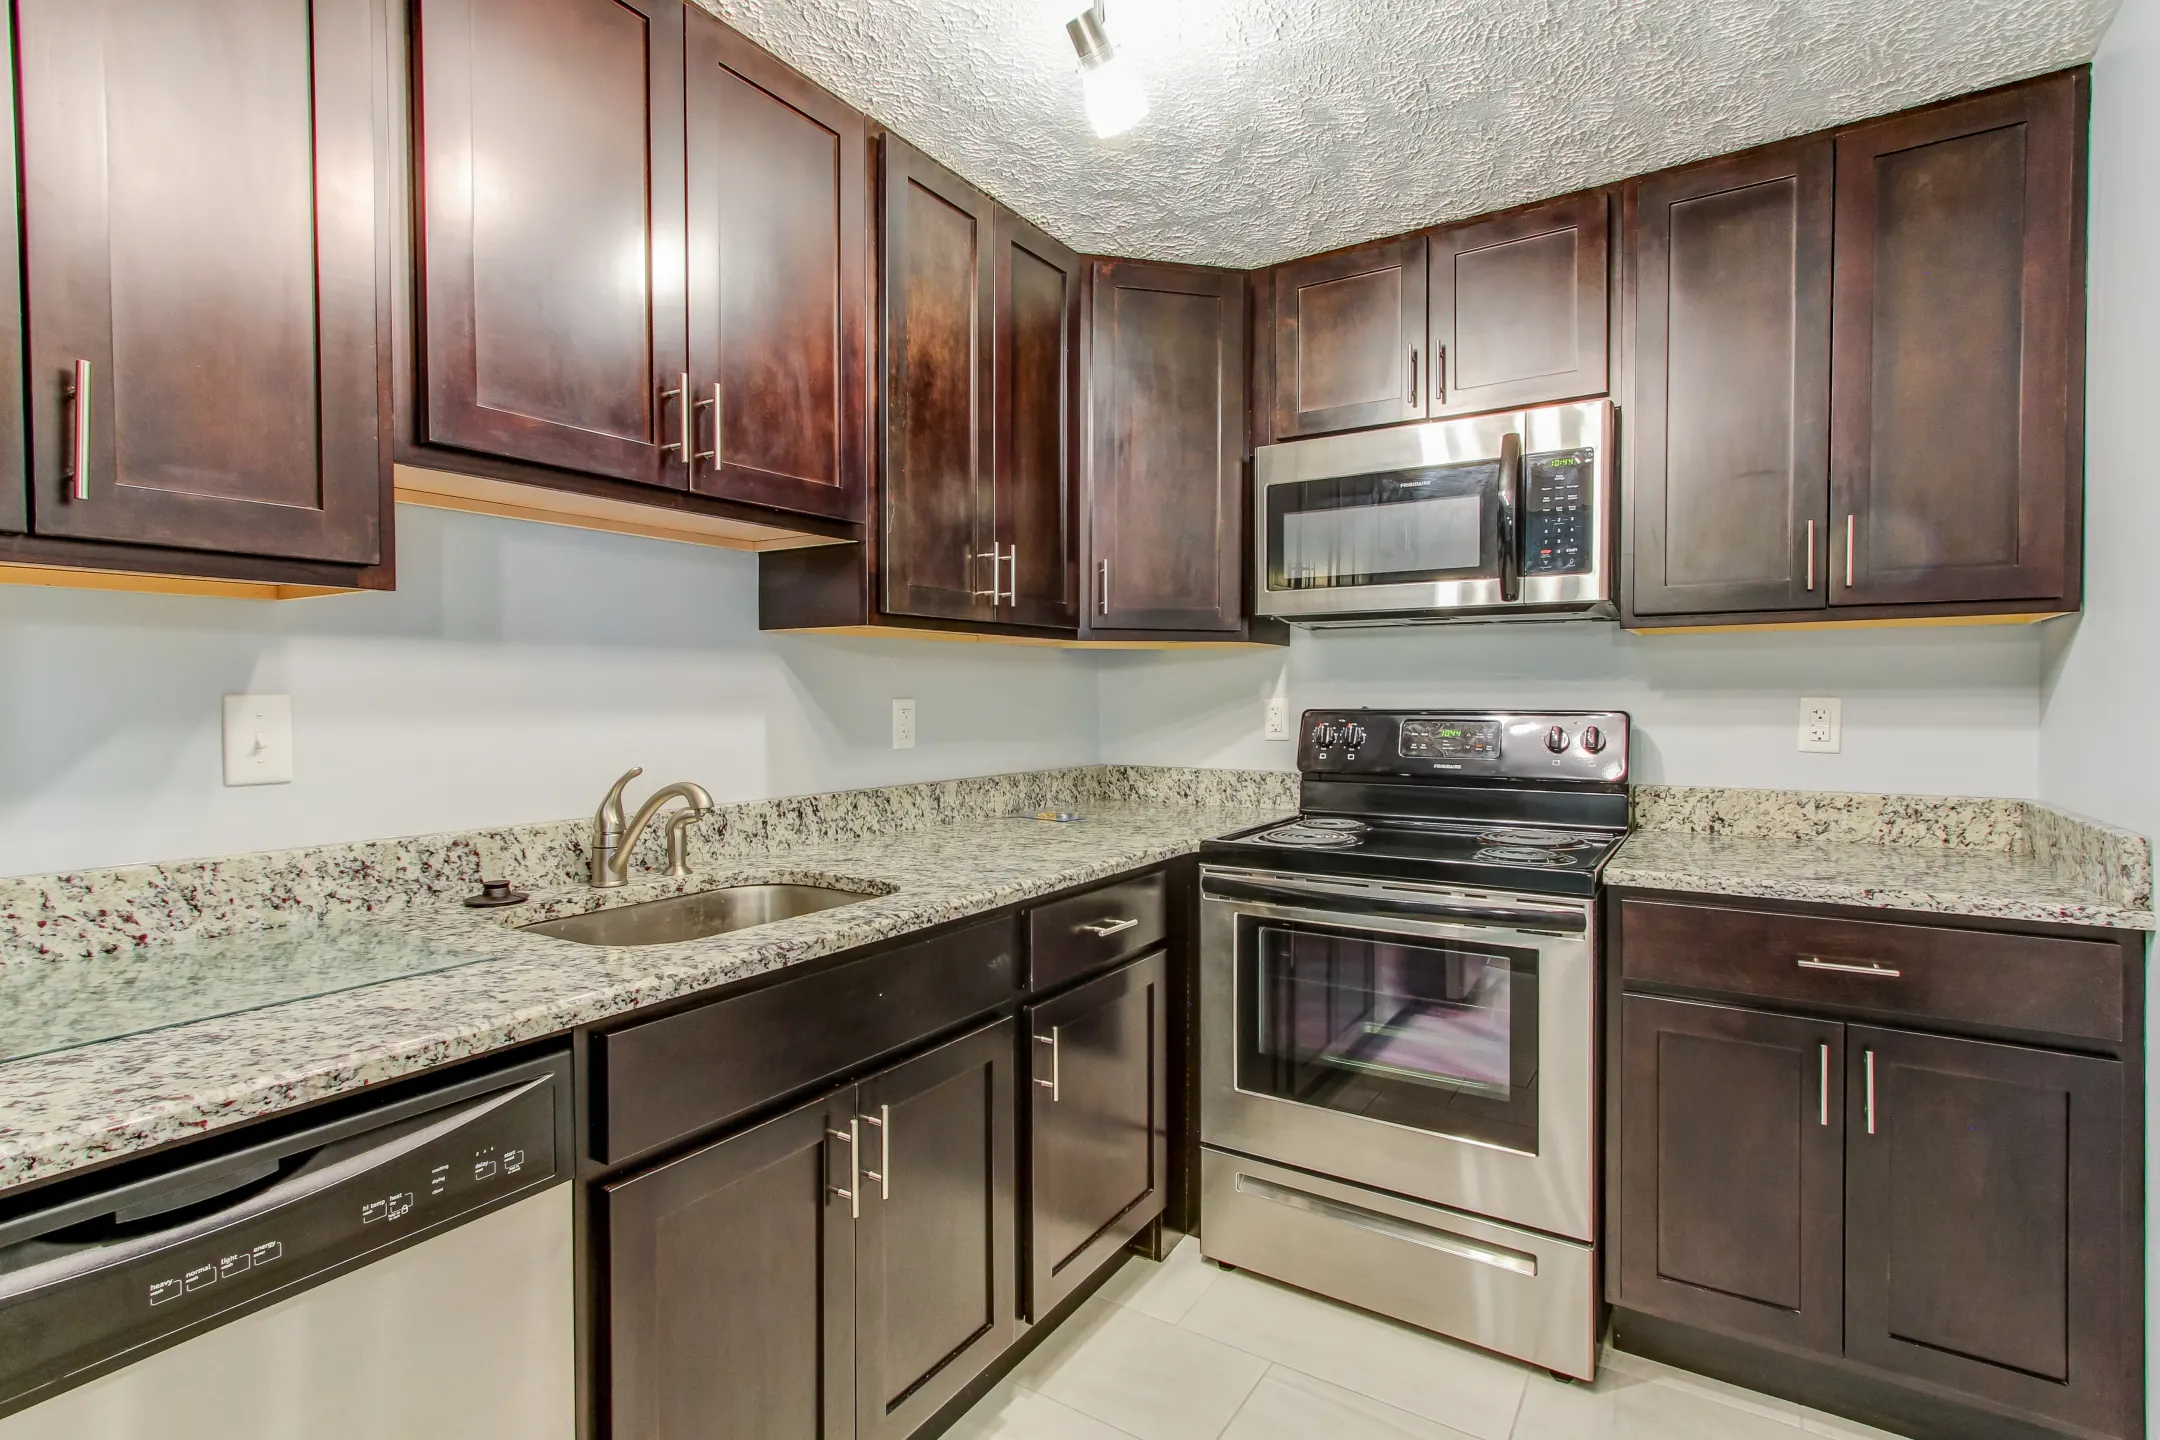 Kitchen - Olmsted Falls Village Apartments - Olmsted Falls, OH